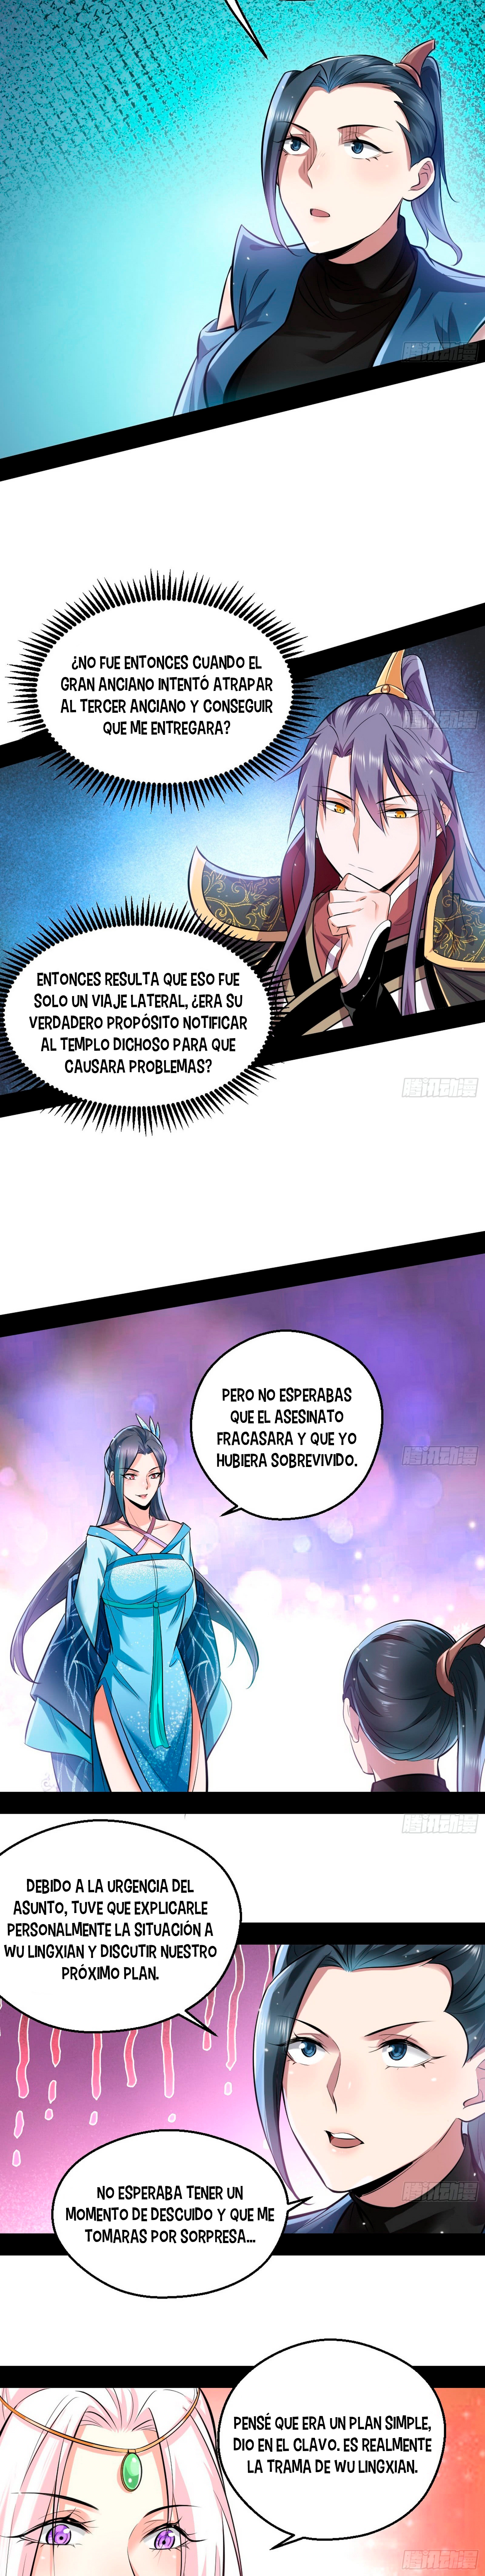 Manga Soy un dios maligno Chapter 45 image number 3